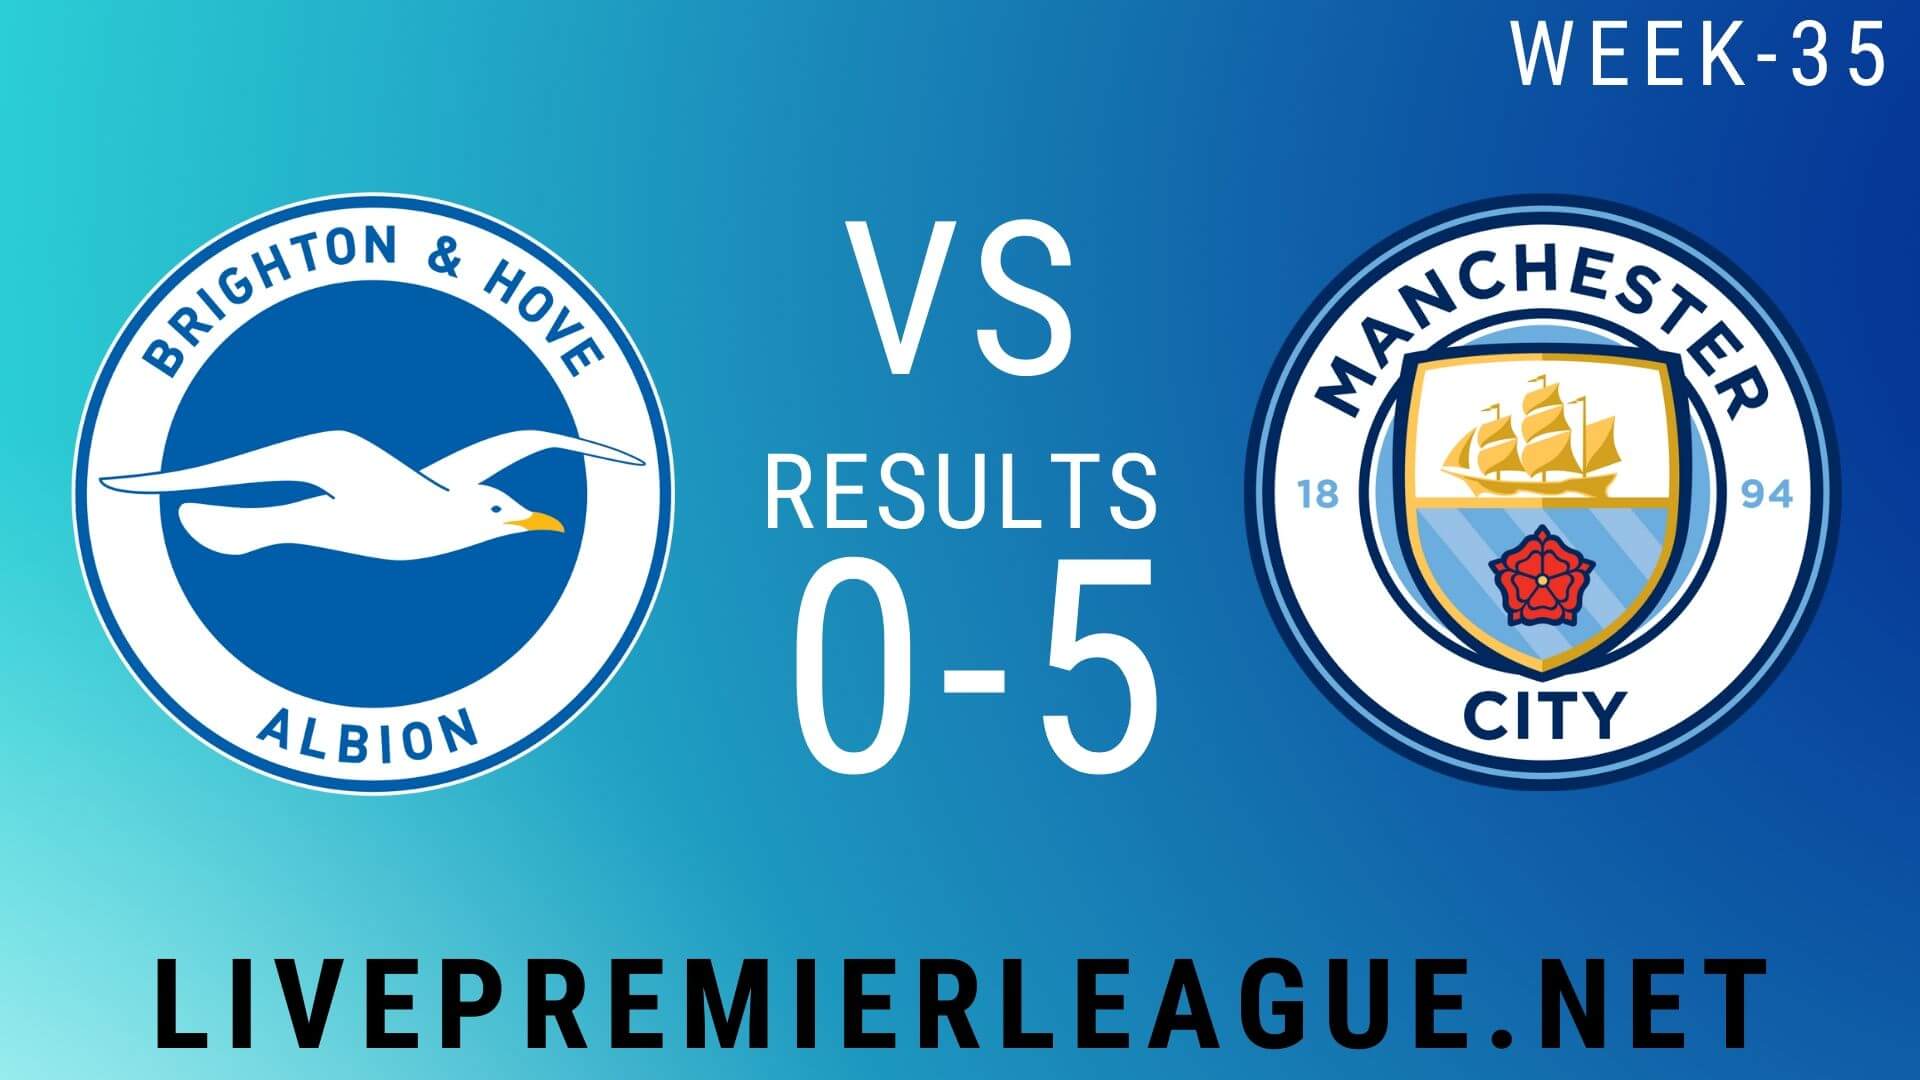 Brighton and Hove Albion Vs Manchester City | Week 35 Result 2020